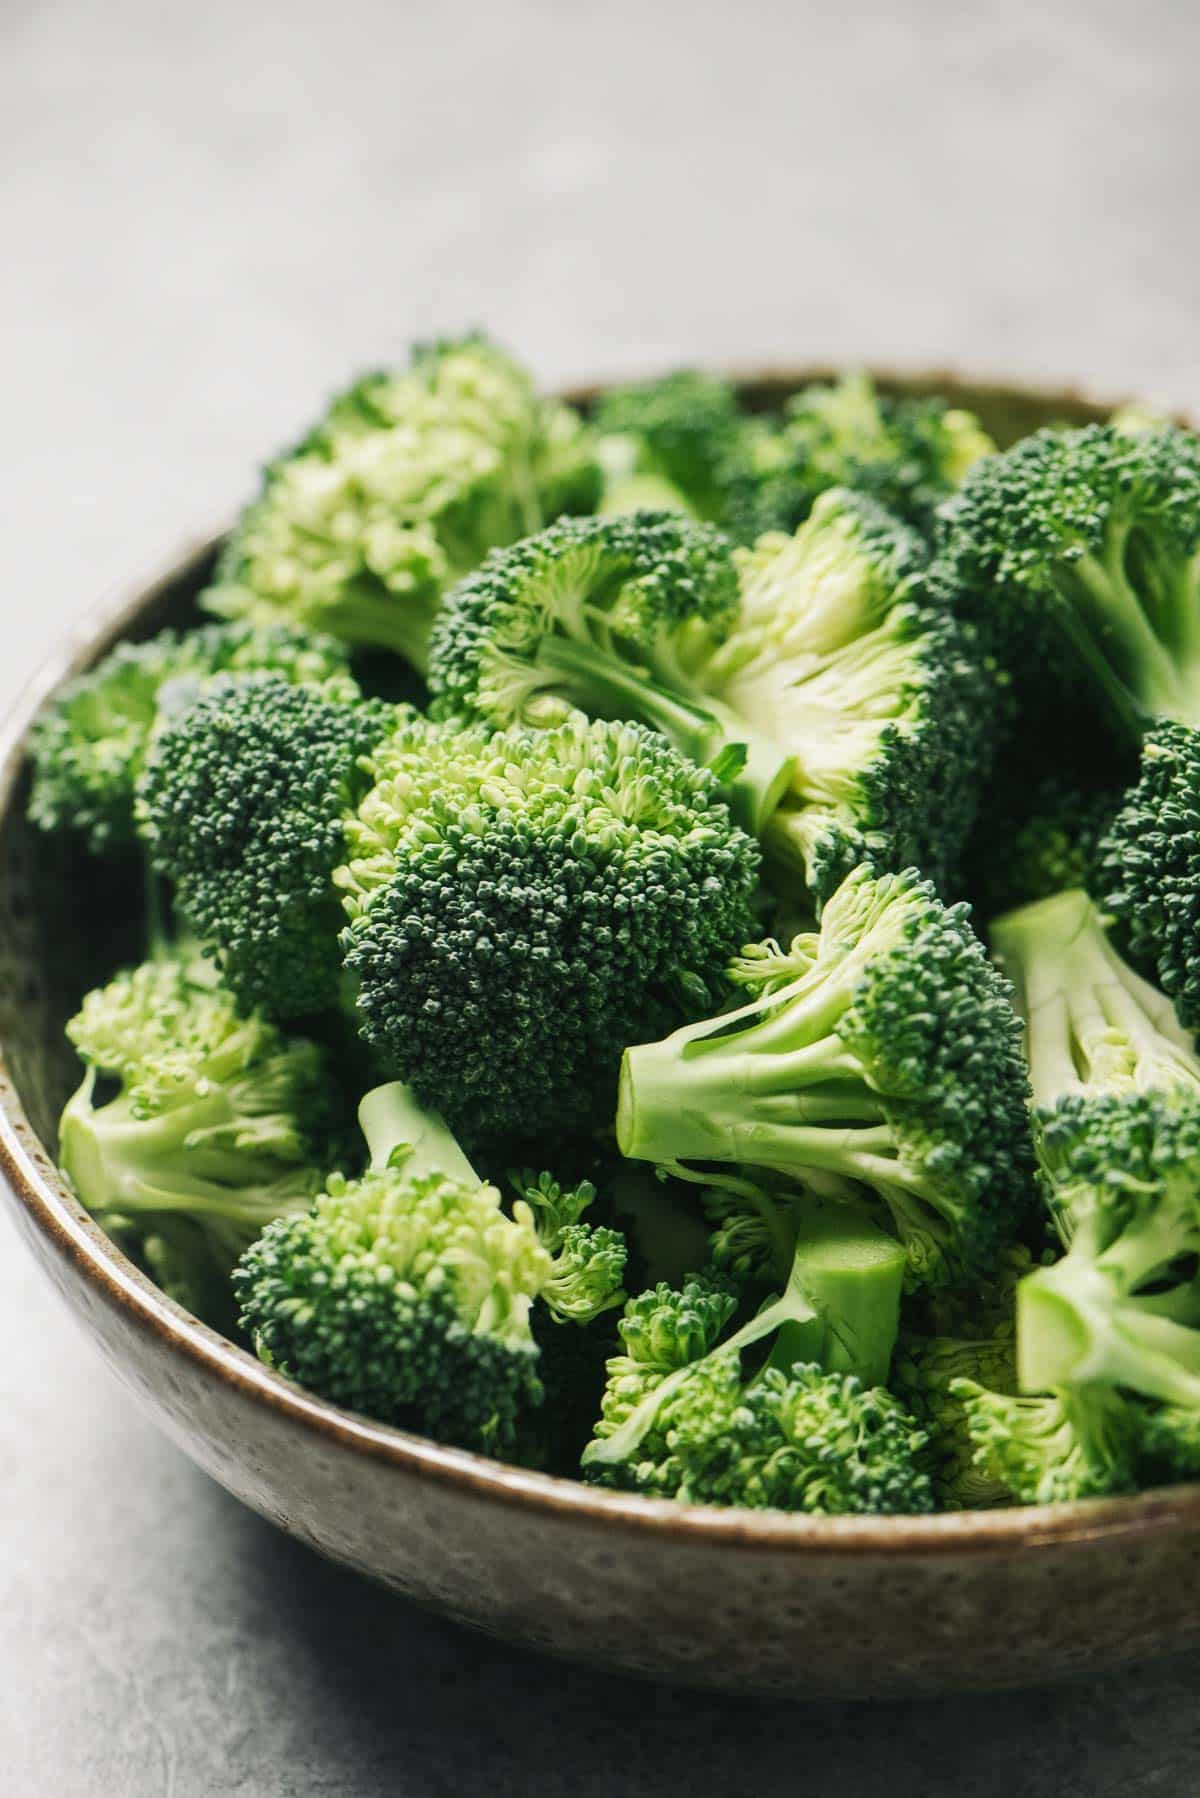 Broccoli florets in a white bowl on top of a white surface.